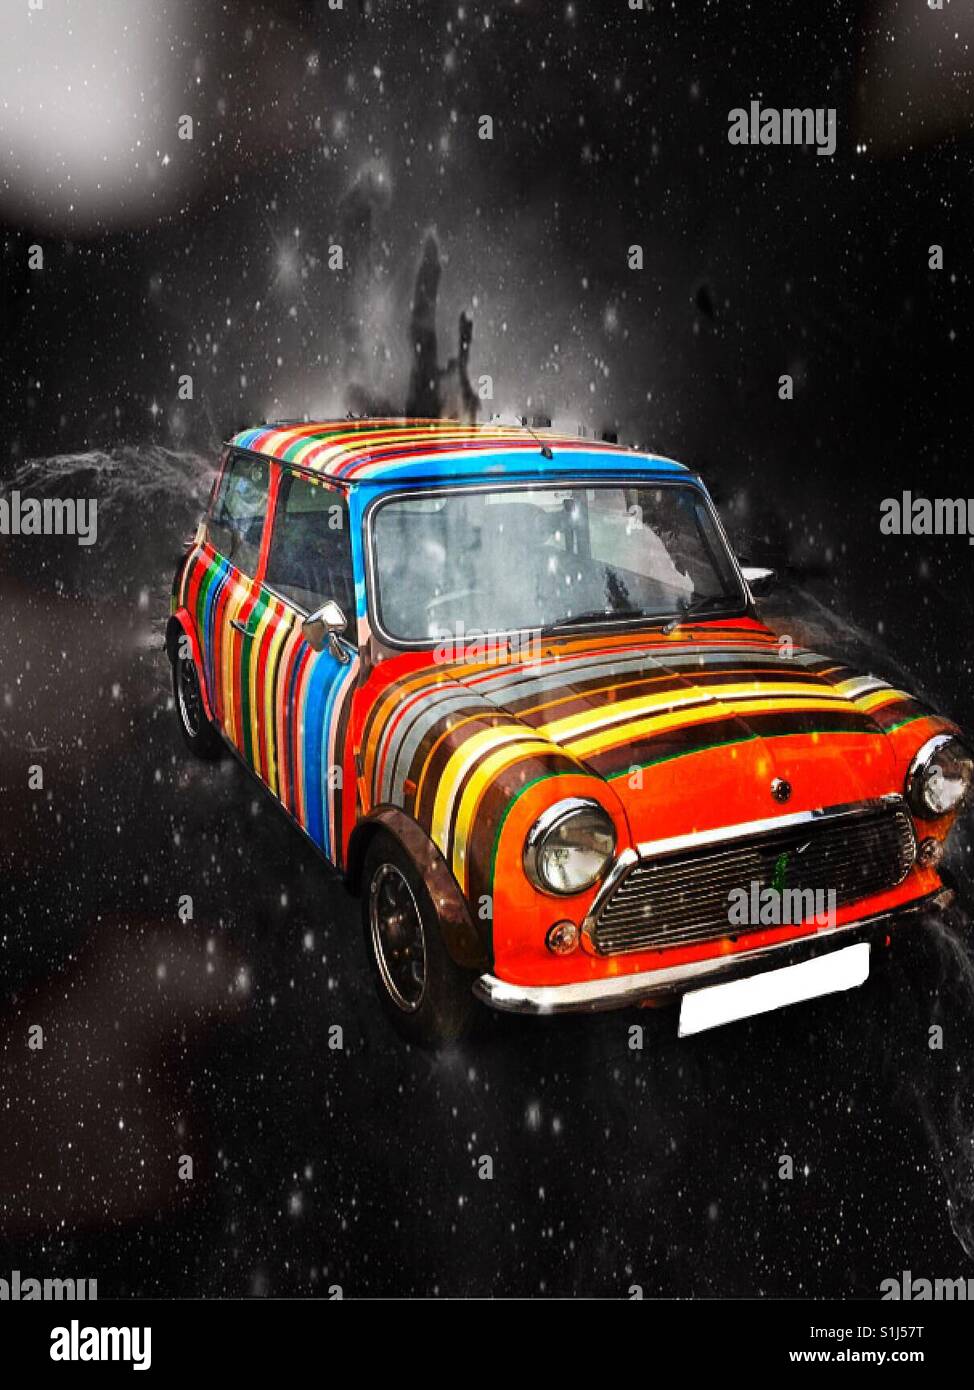 Celebration launch of the Paul Smith Stripe pop-up boutique, Paul's  signature striped Mini Cooper at Bicester Village. People were asked to  share their best photo using #bicestervillage Stock Photo - Alamy